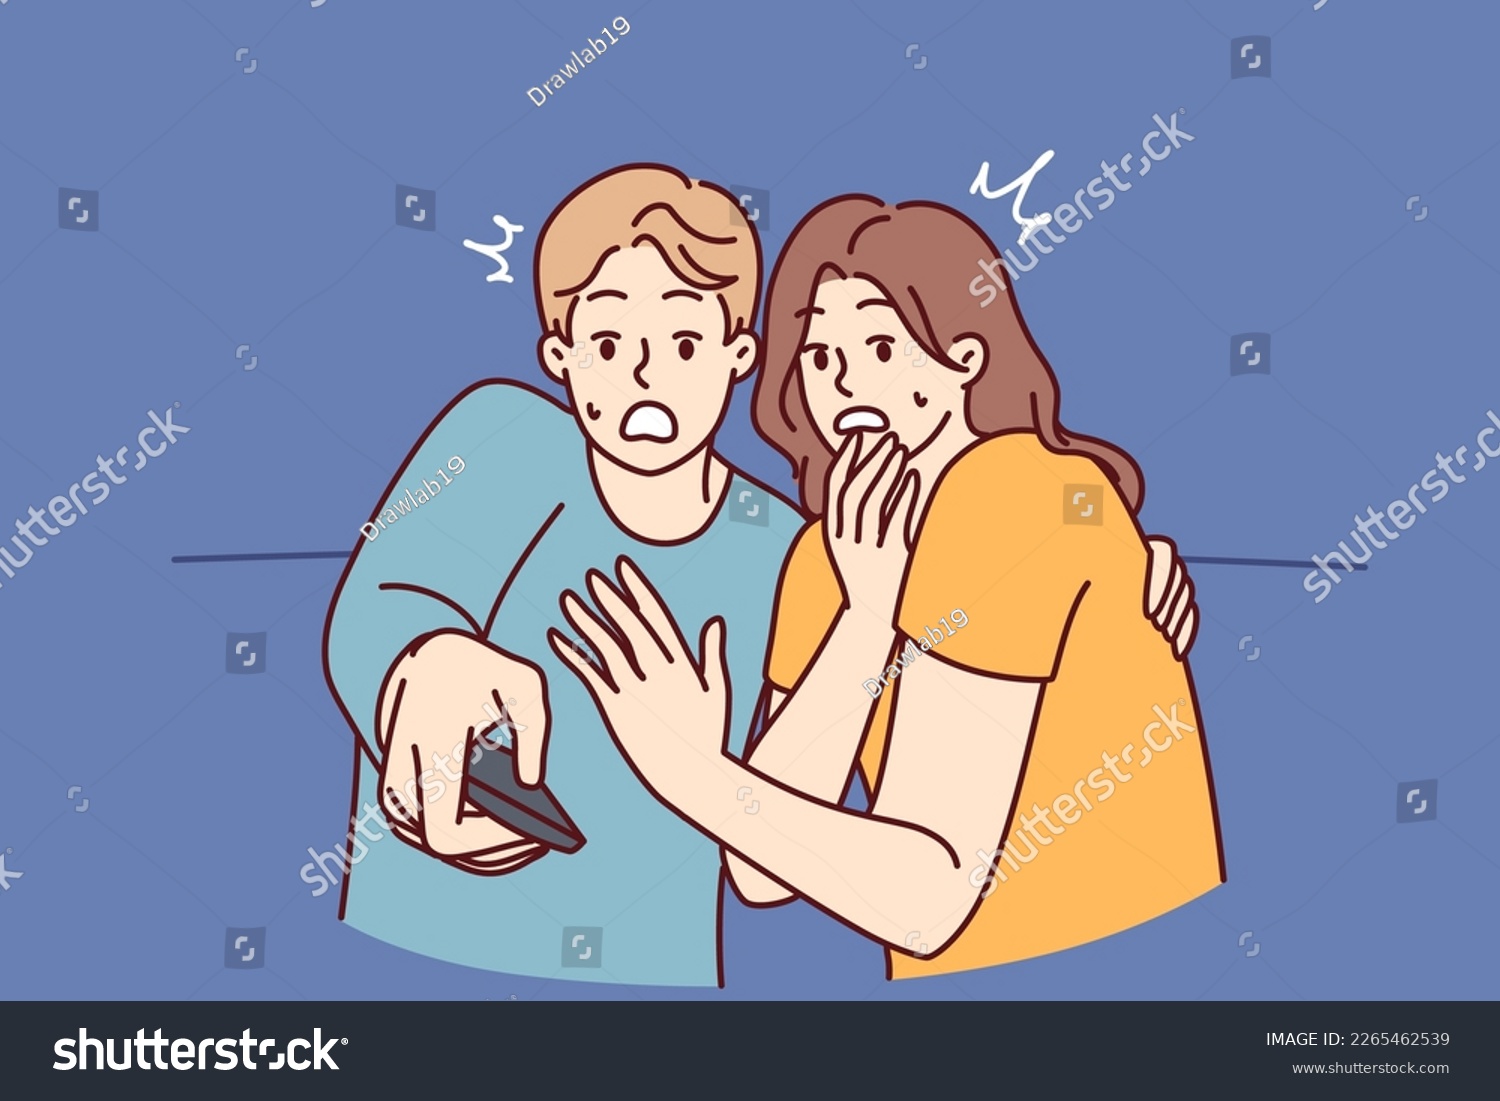 SVG of Frightened man and woman with TV remote control are shocked after watching scary movie with murders or monsters. Shocked couple gets scared while watching news on TV because of depressing forecasts  svg